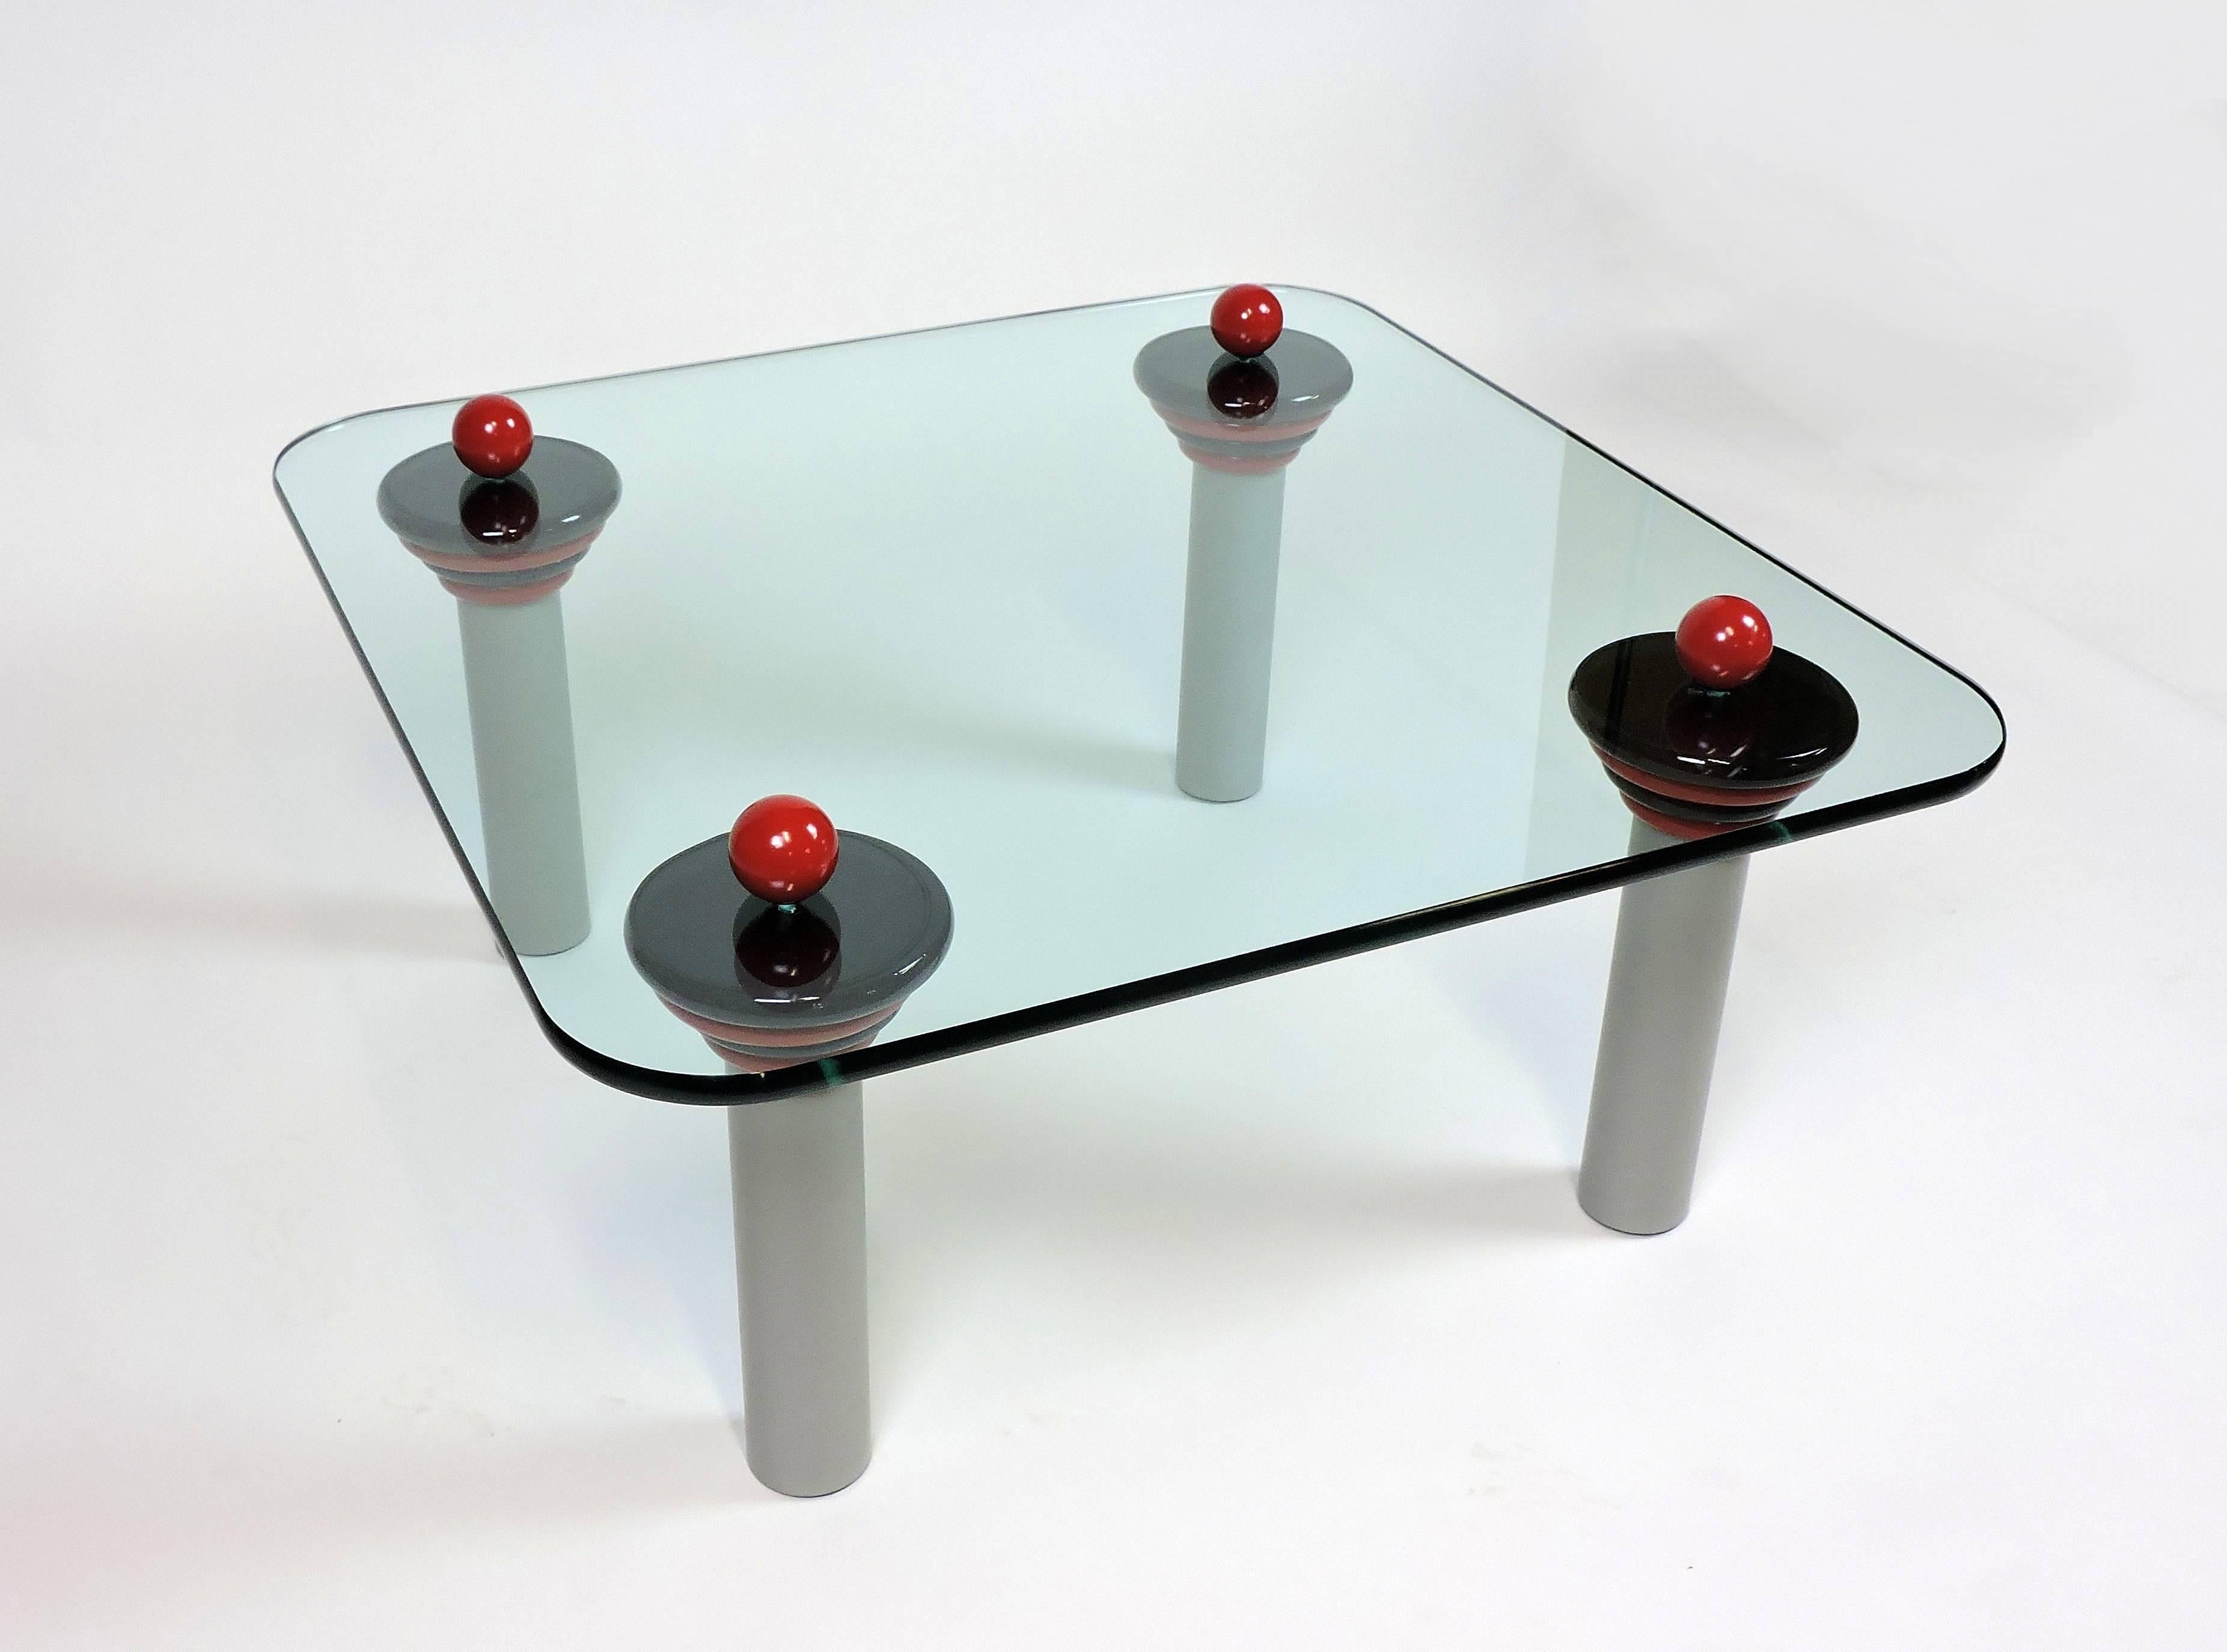 Fun and colorful coffee table in the style of Ettore Sottsass. This high quality table has wooden red balls and black and red circular discs that rest on top of gray metal tubular legs. It has a 3/4 inch thick glass top with a polished edge.